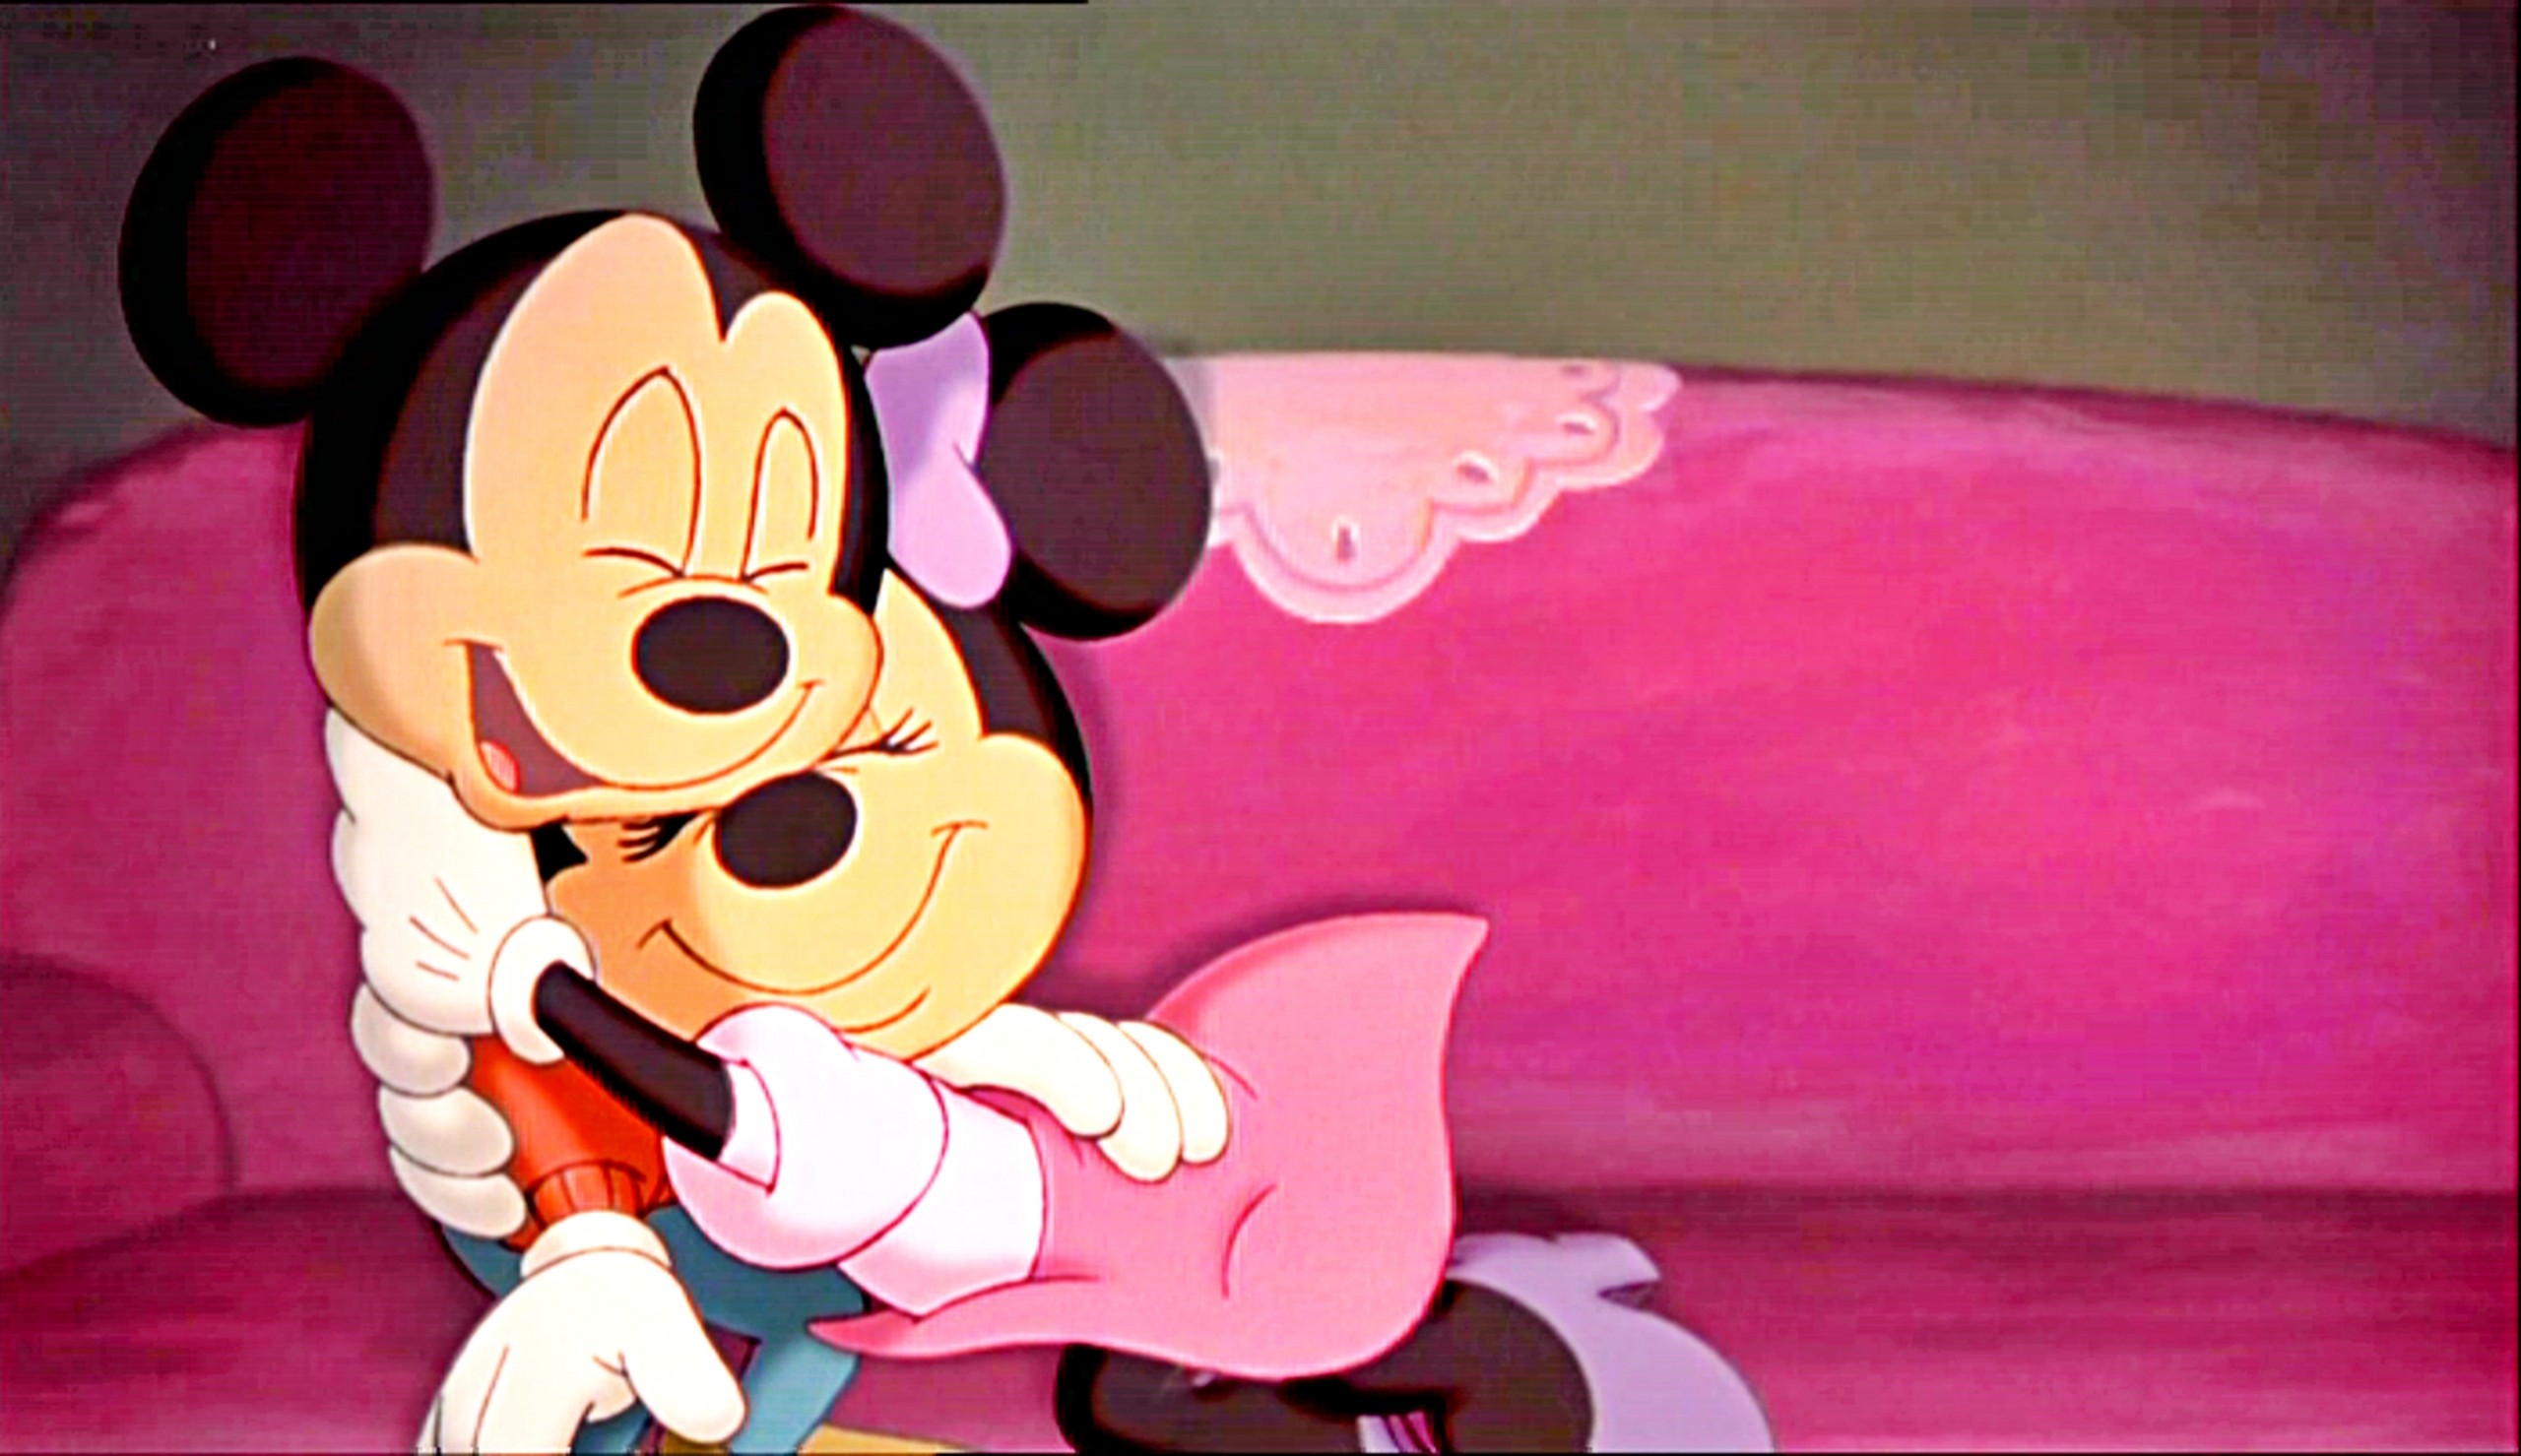 2560x1479 HD Background Mickey Mouse And Minnie Mouse Love Couple Heart 1314Ã770 Mickey  Mouse Picture Wallpapers (47 Wallpapers) | Adorable Wallpapers | Pinterest  ...